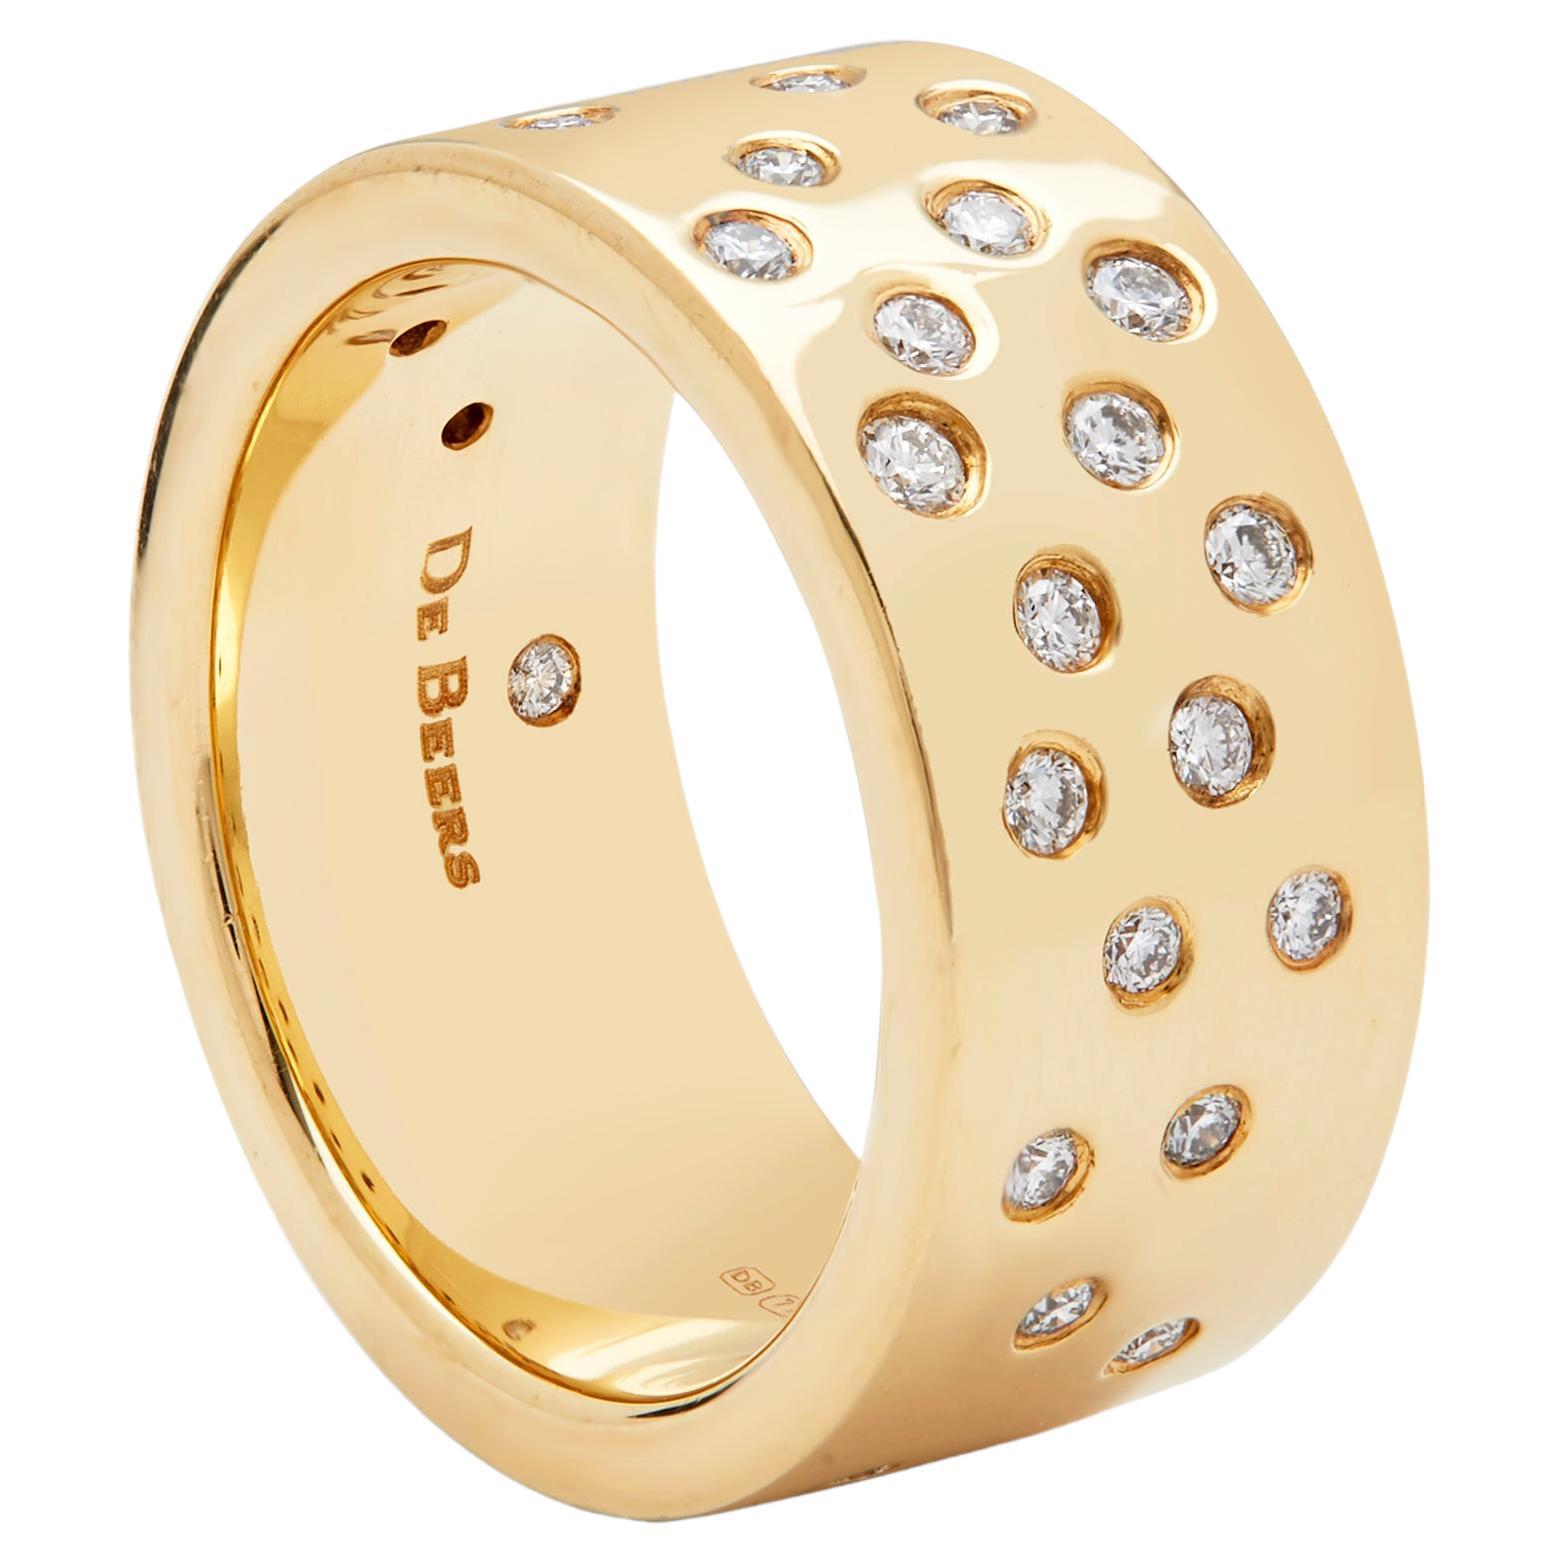 De Beers 9mm wide diamond wide band dress ring  For Sale